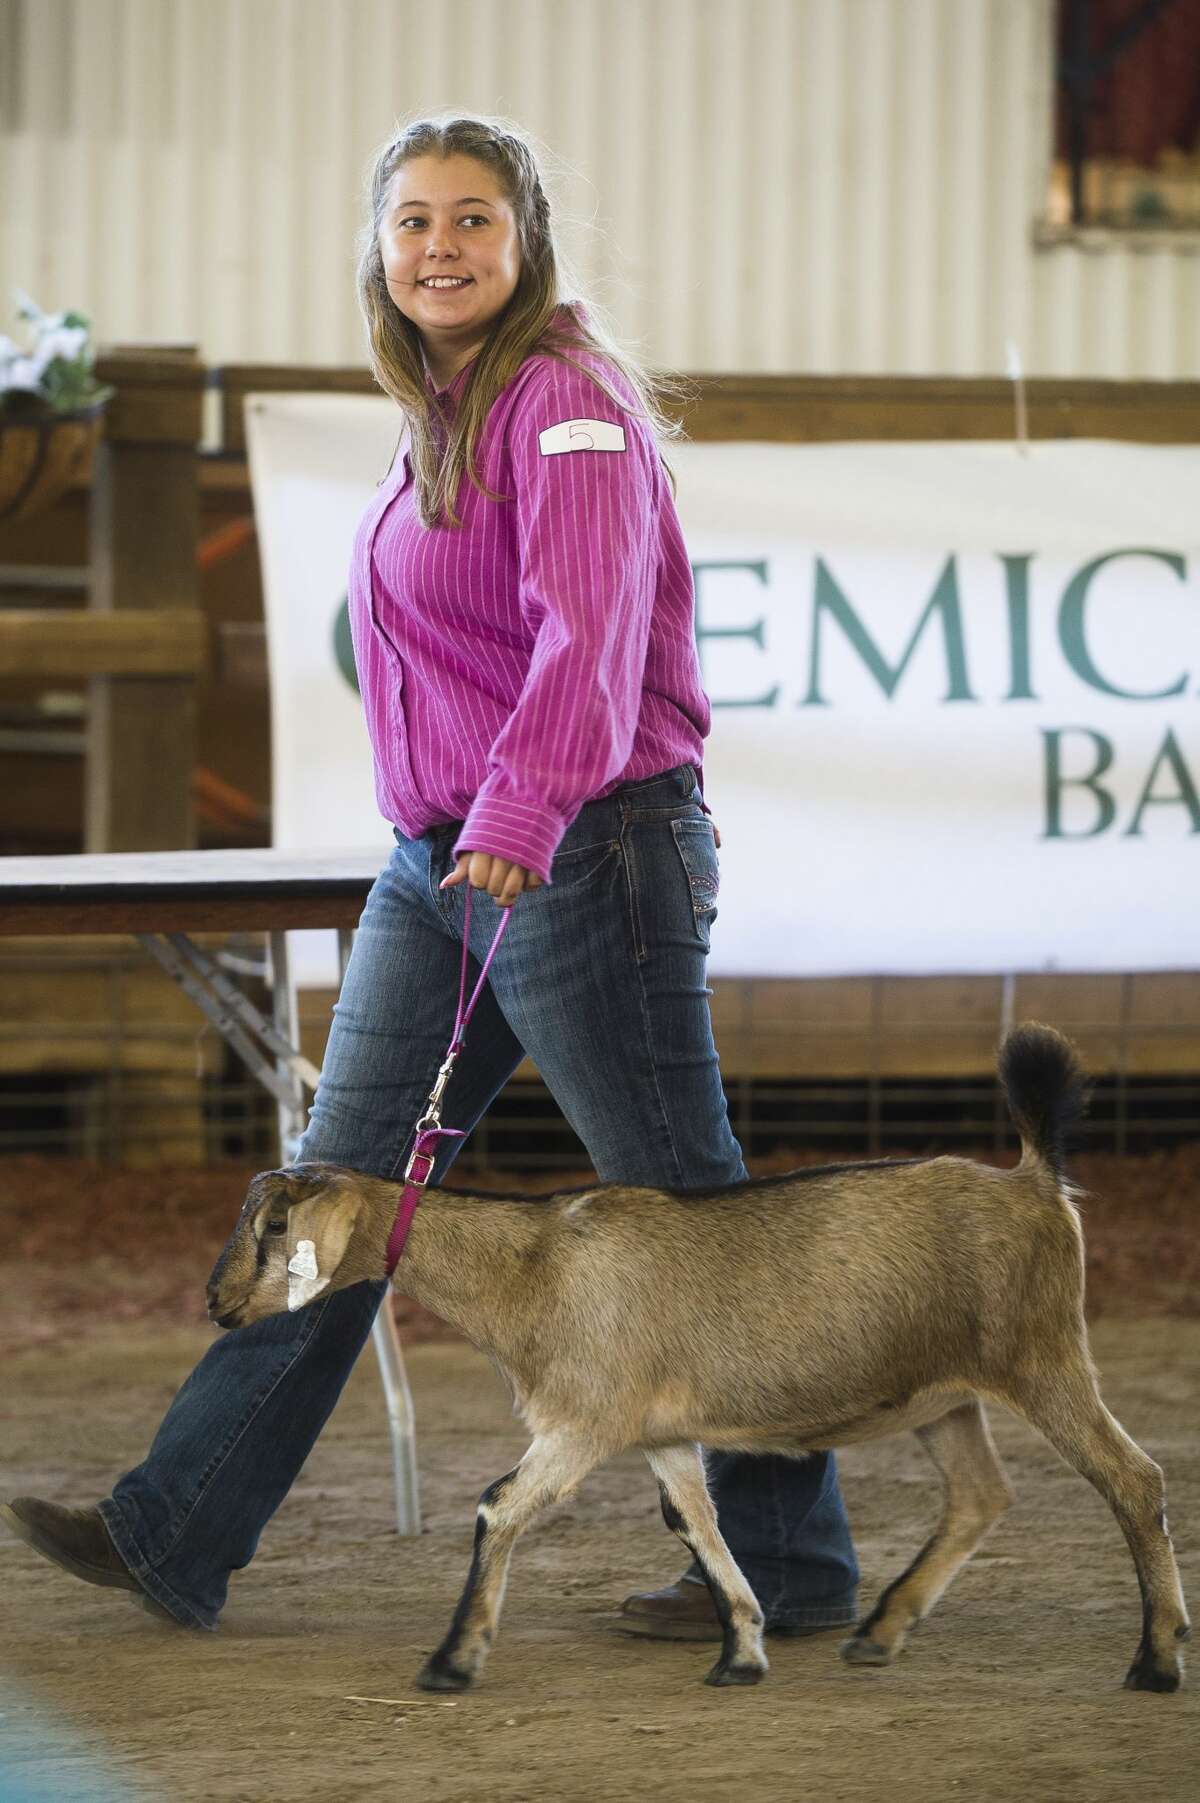 Bryton Lalonde auctions off her goat during the Midland County Fair small animal auction on Wednesday, August 16, 2017 at the Midland County Fairgrounds.